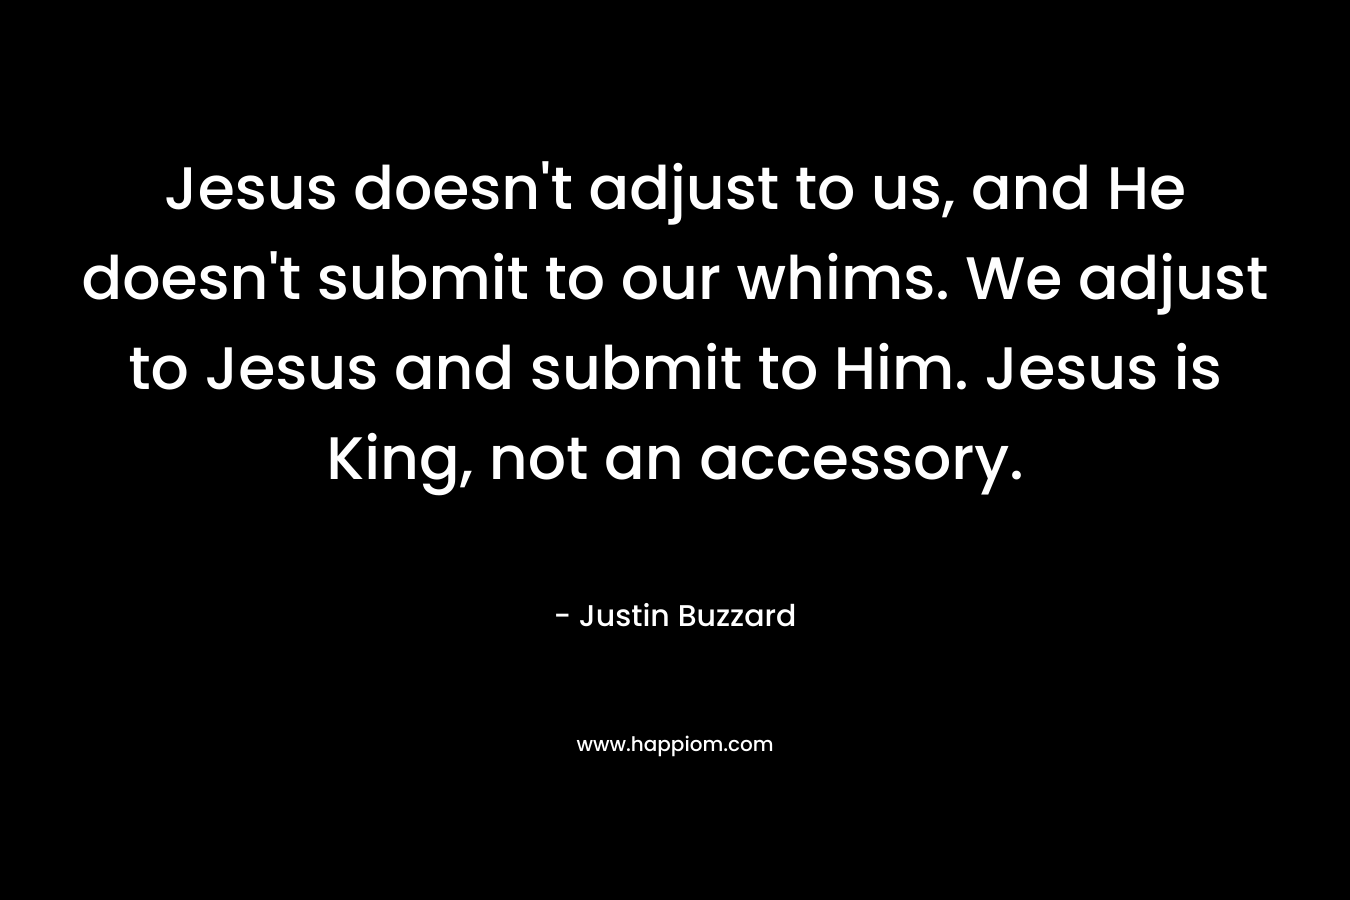 Jesus doesn't adjust to us, and He doesn't submit to our whims. We adjust to Jesus and submit to Him. Jesus is King, not an accessory.